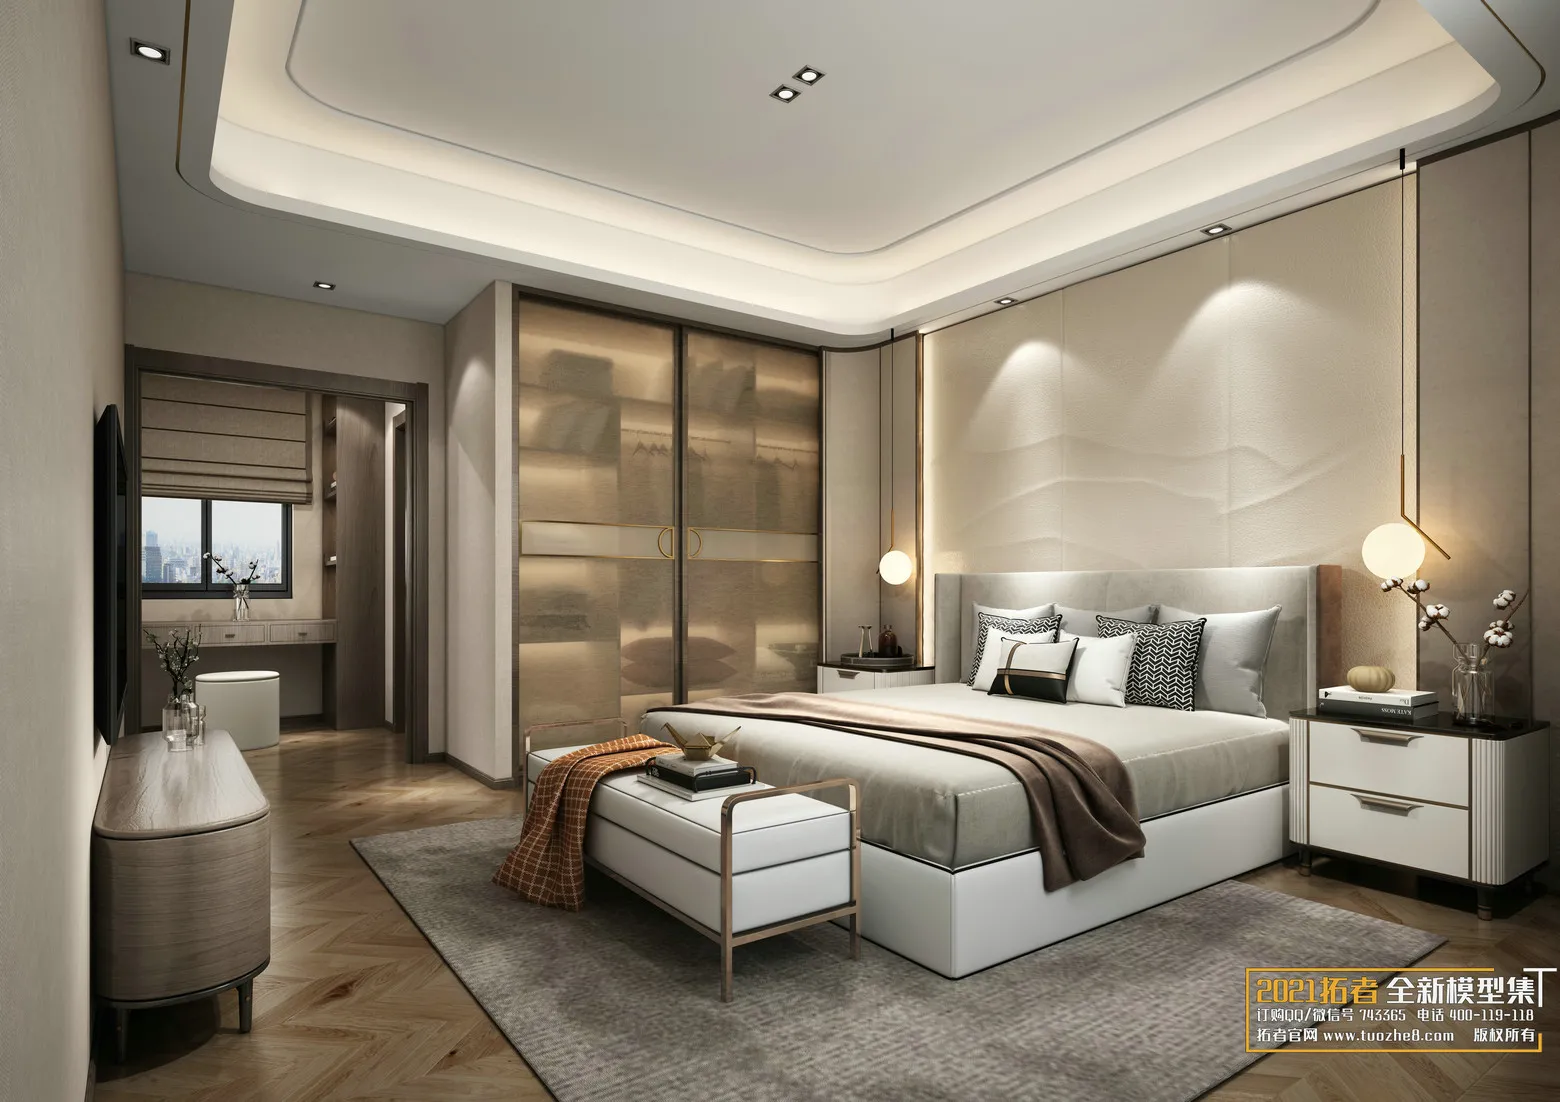 EXTENSION 2021 – 2. BEDROOM – 2.CHINESE STYLES – 29vr – VRAY